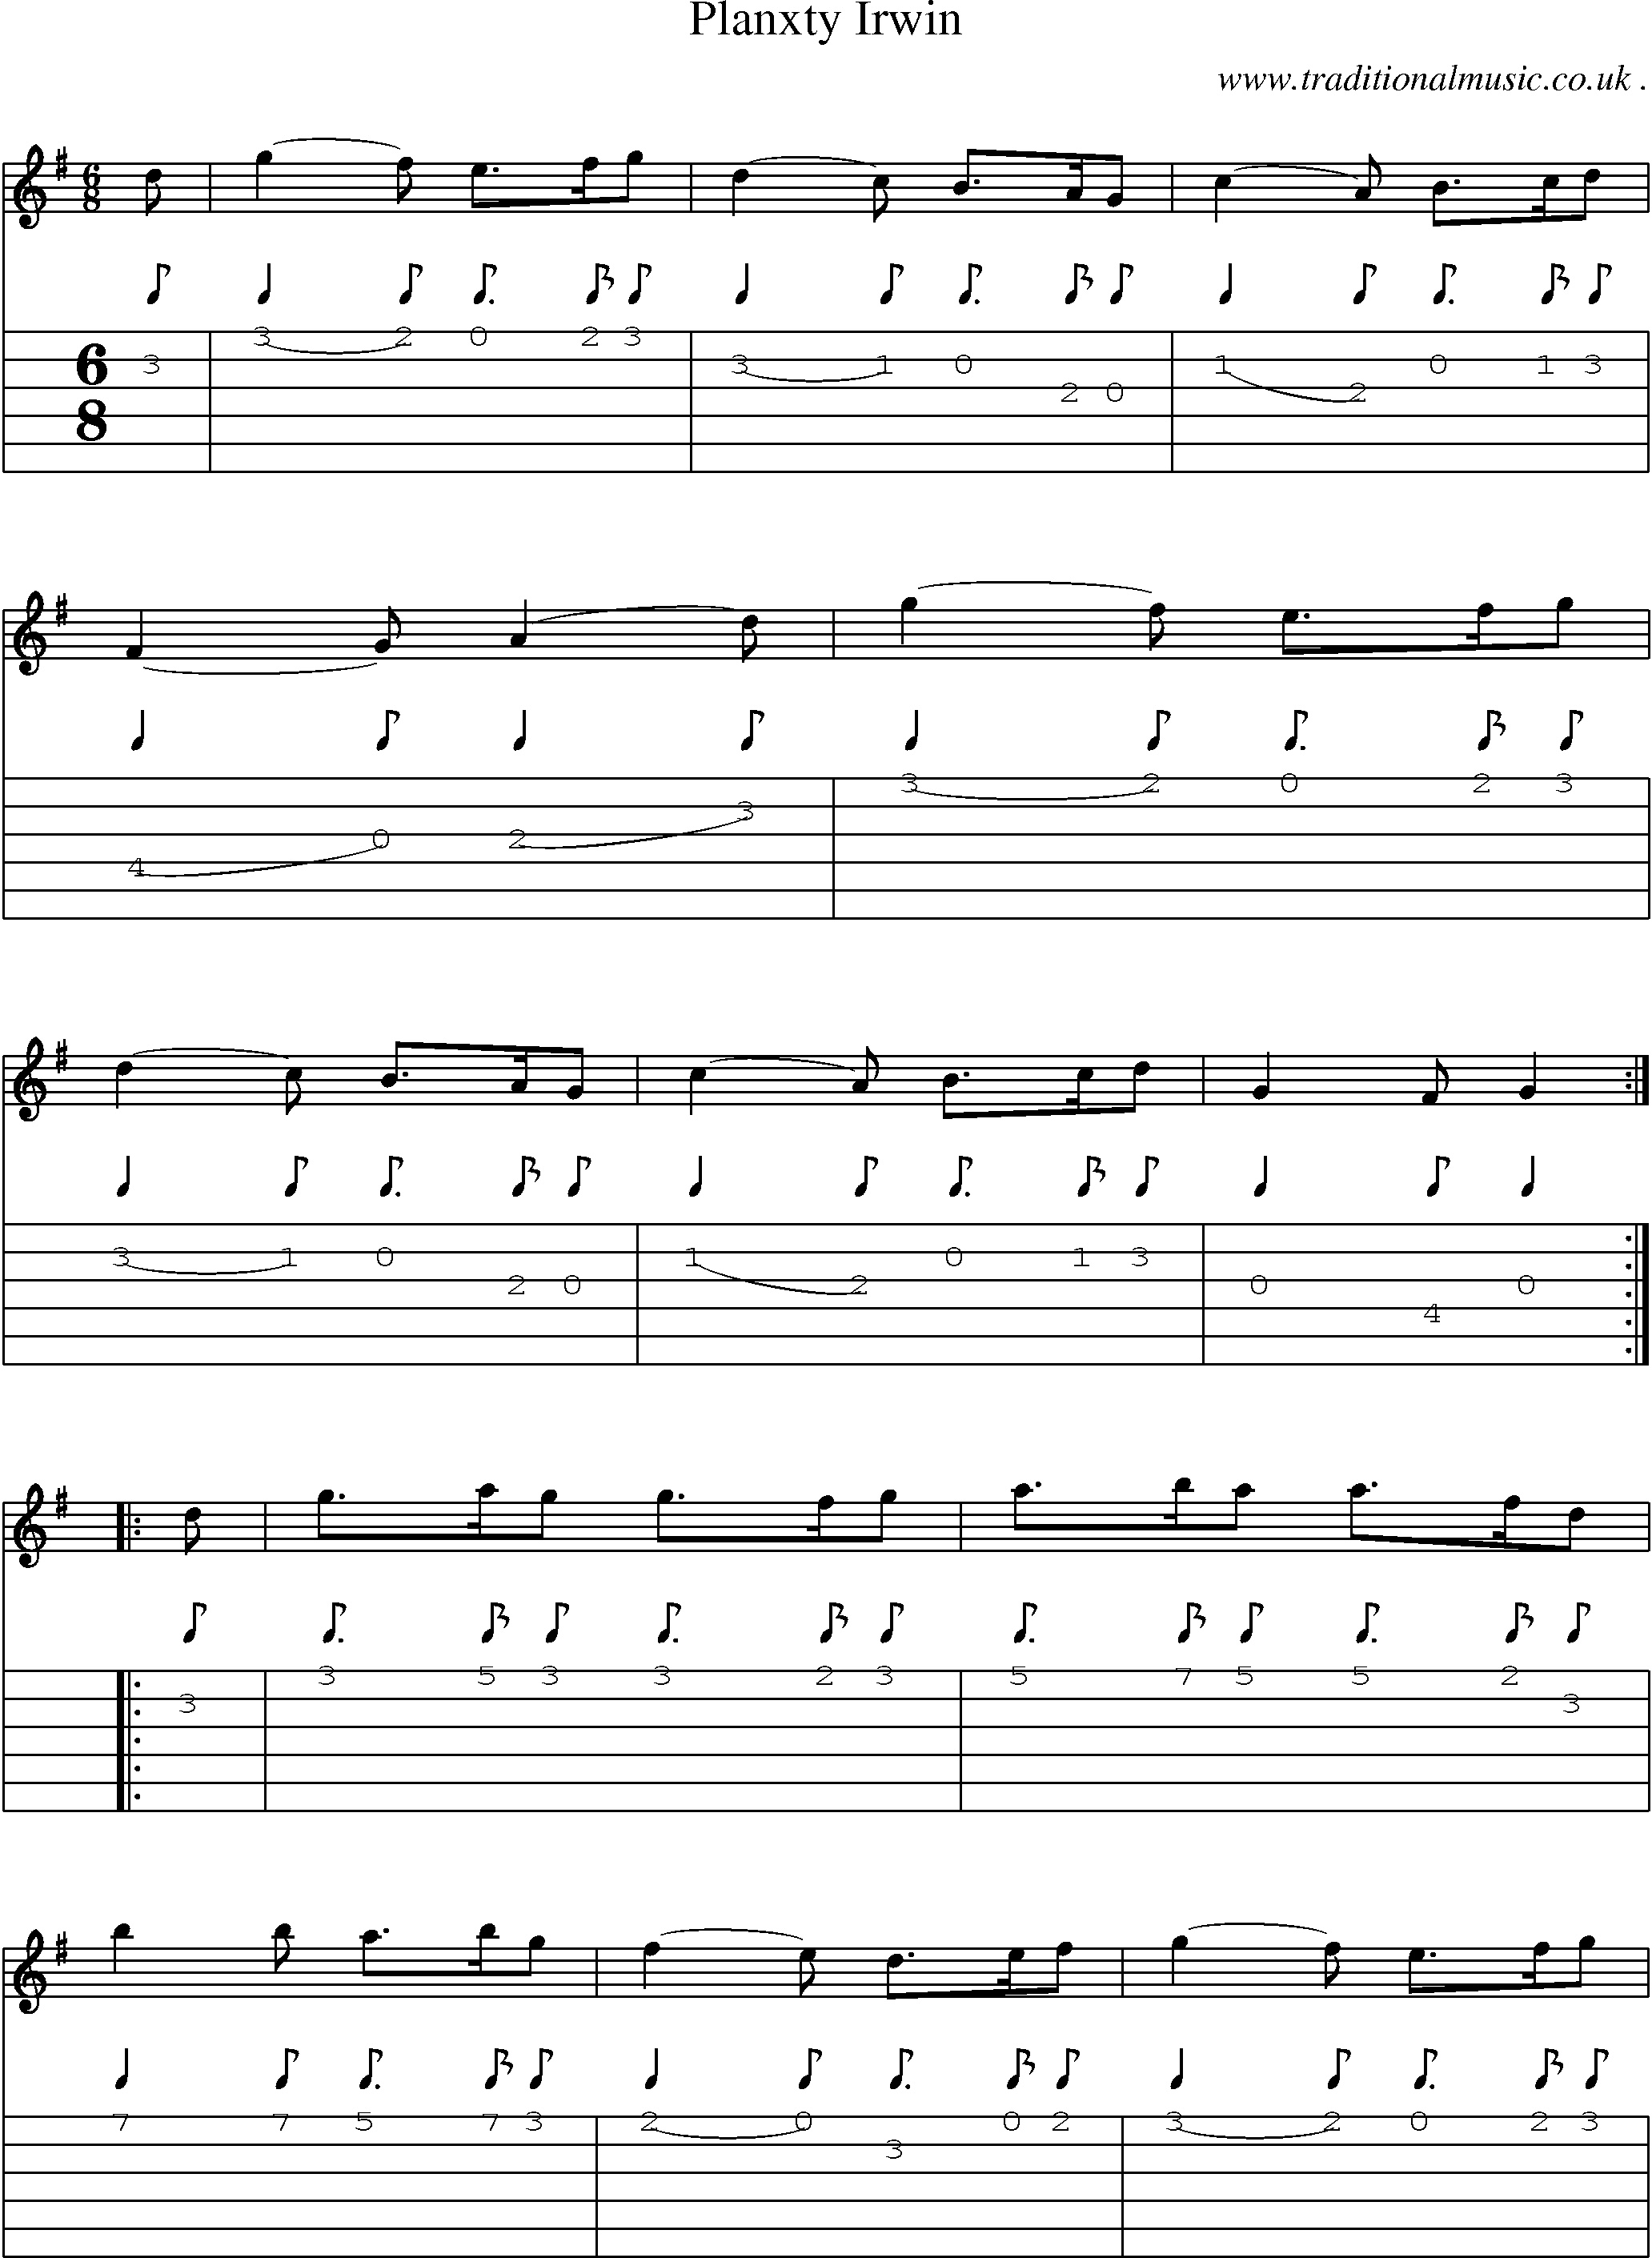 Sheet-Music and Guitar Tabs for Planxty Irwin